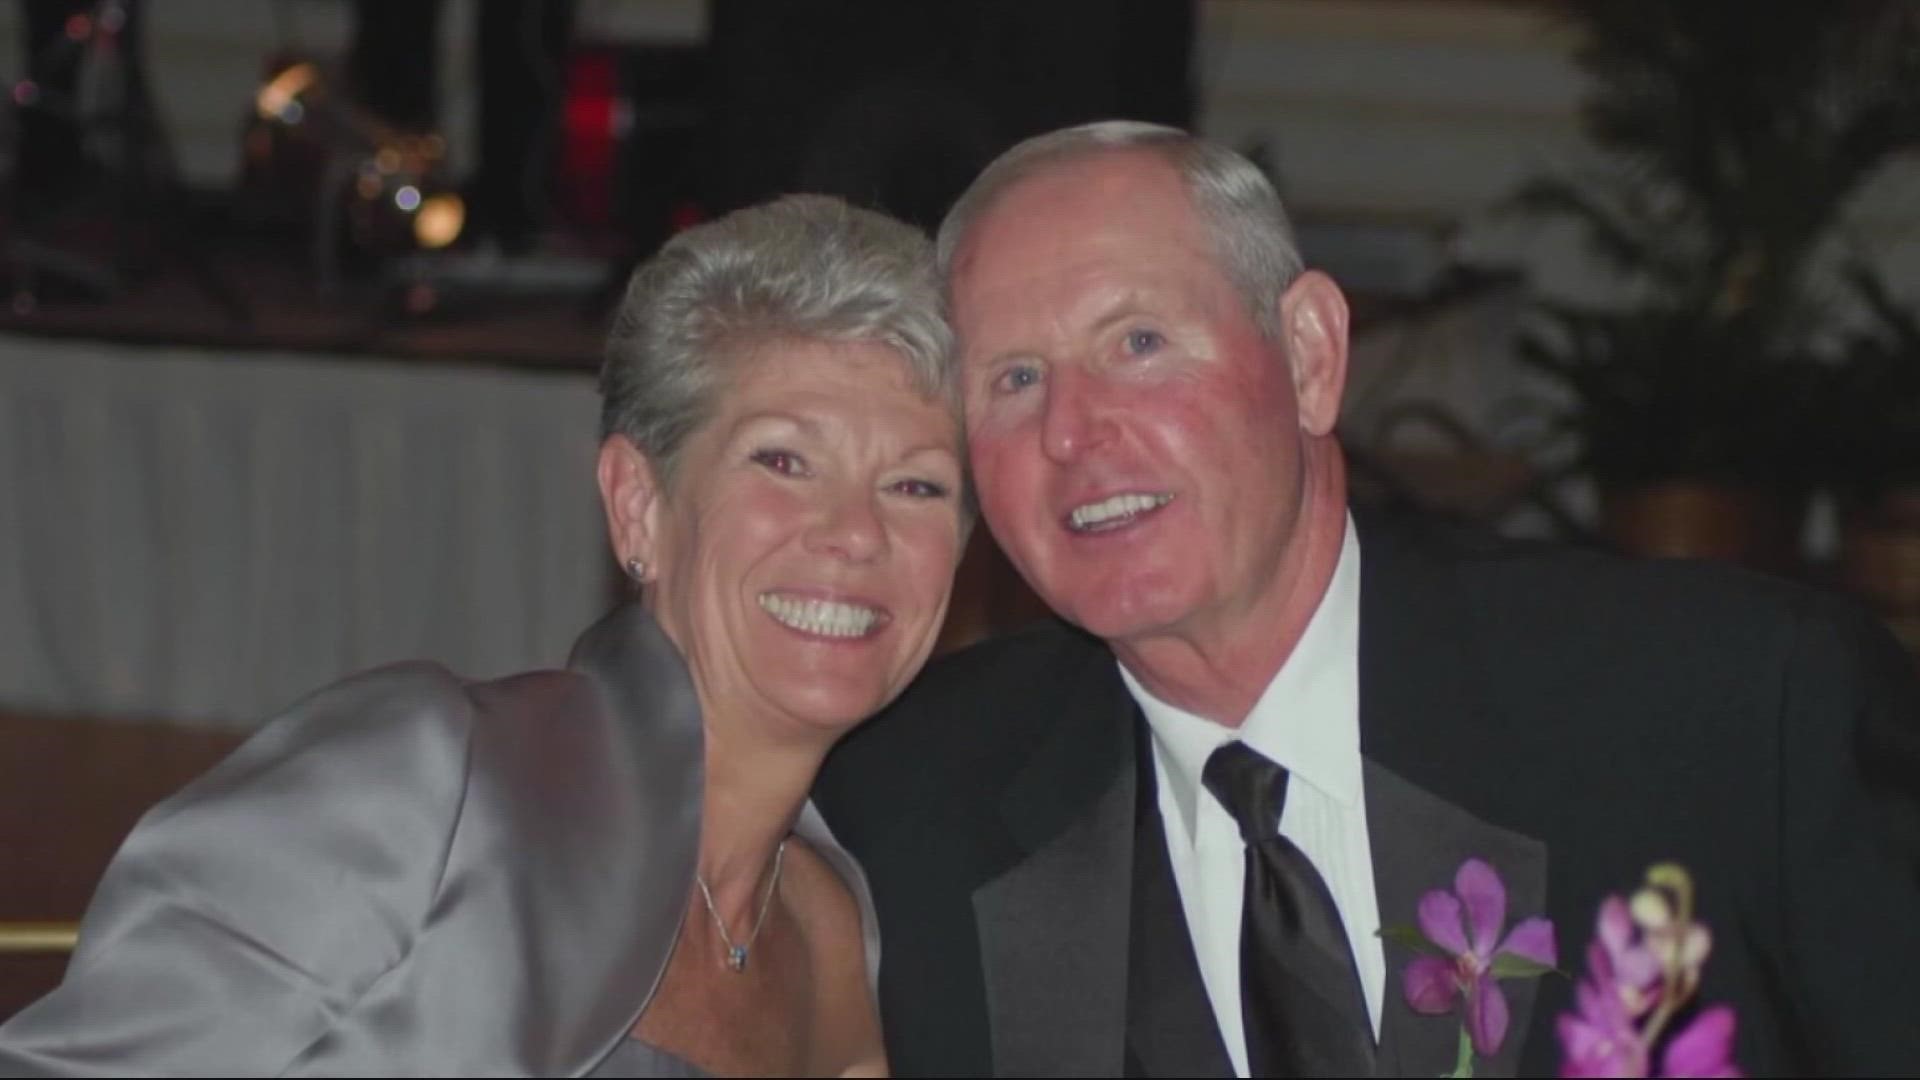 The funeral for Judy Coughlin takes place at St. Paul's Catholic Church in Jacksonville Beach at 11:00 a.m.